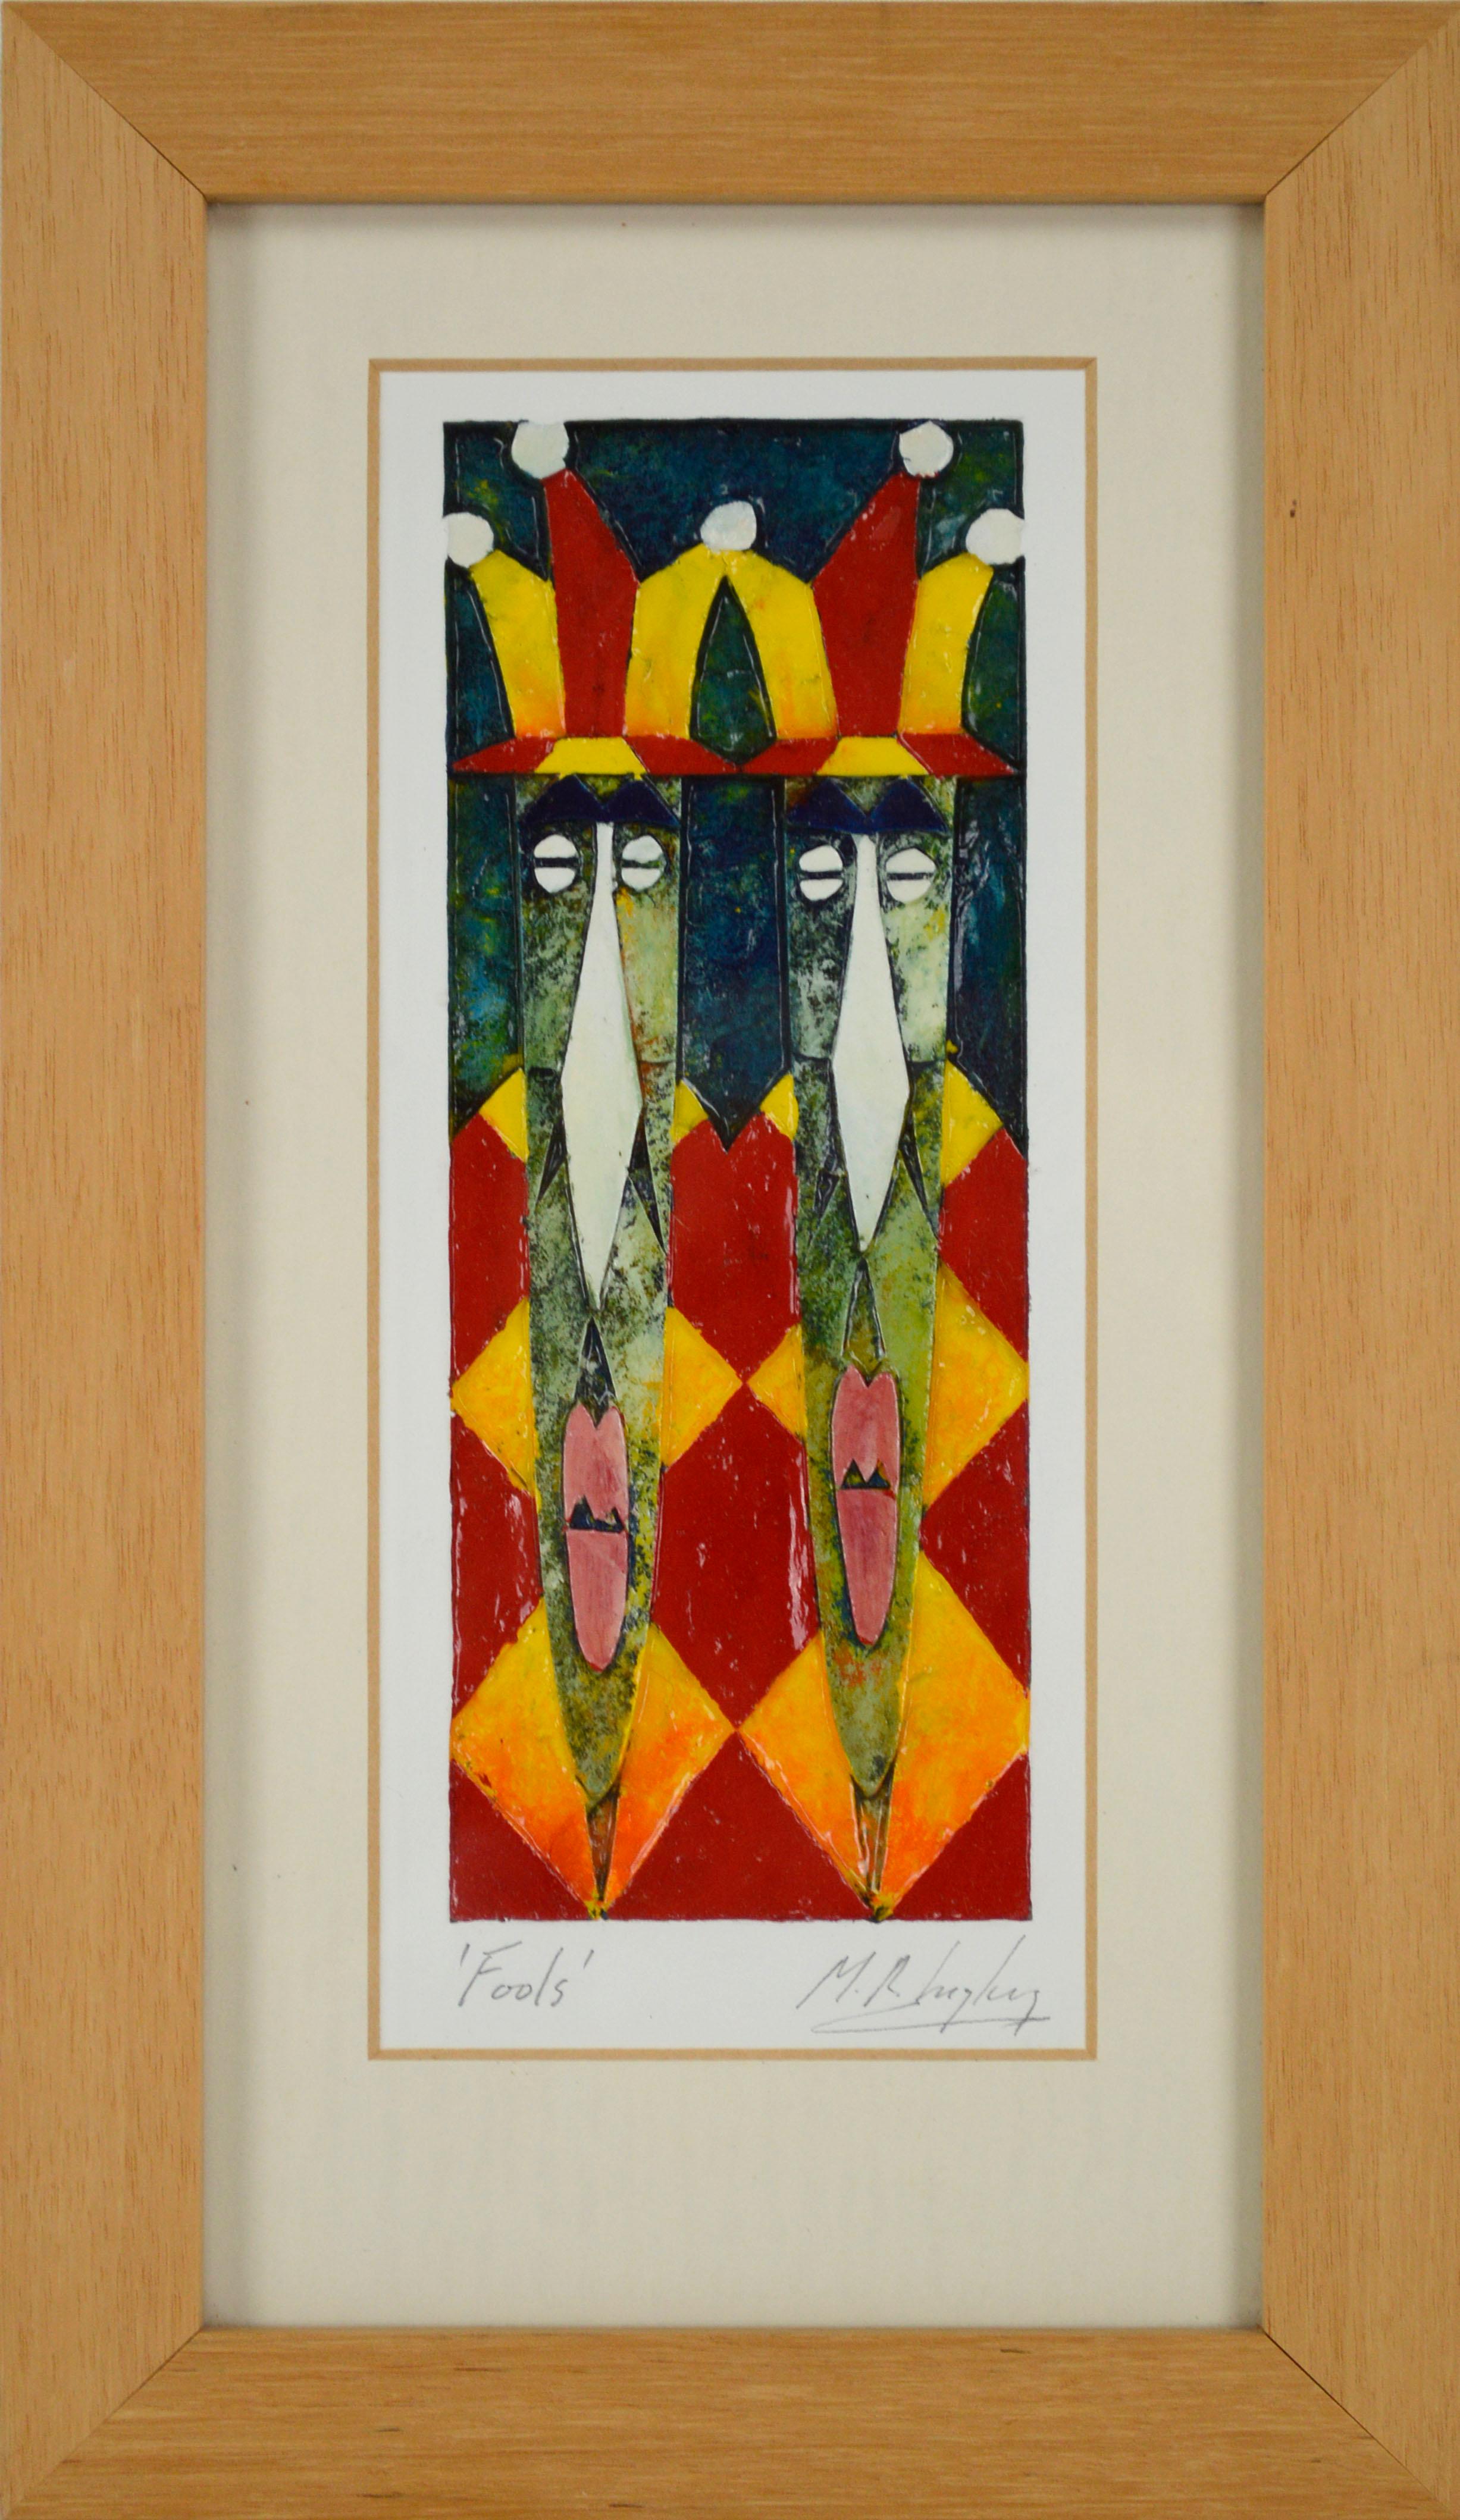 Martin Ingley Figurative Painting - "Fools", Harlequin Jester Twins, Carved Paper Relief Painting in Primary Colors 